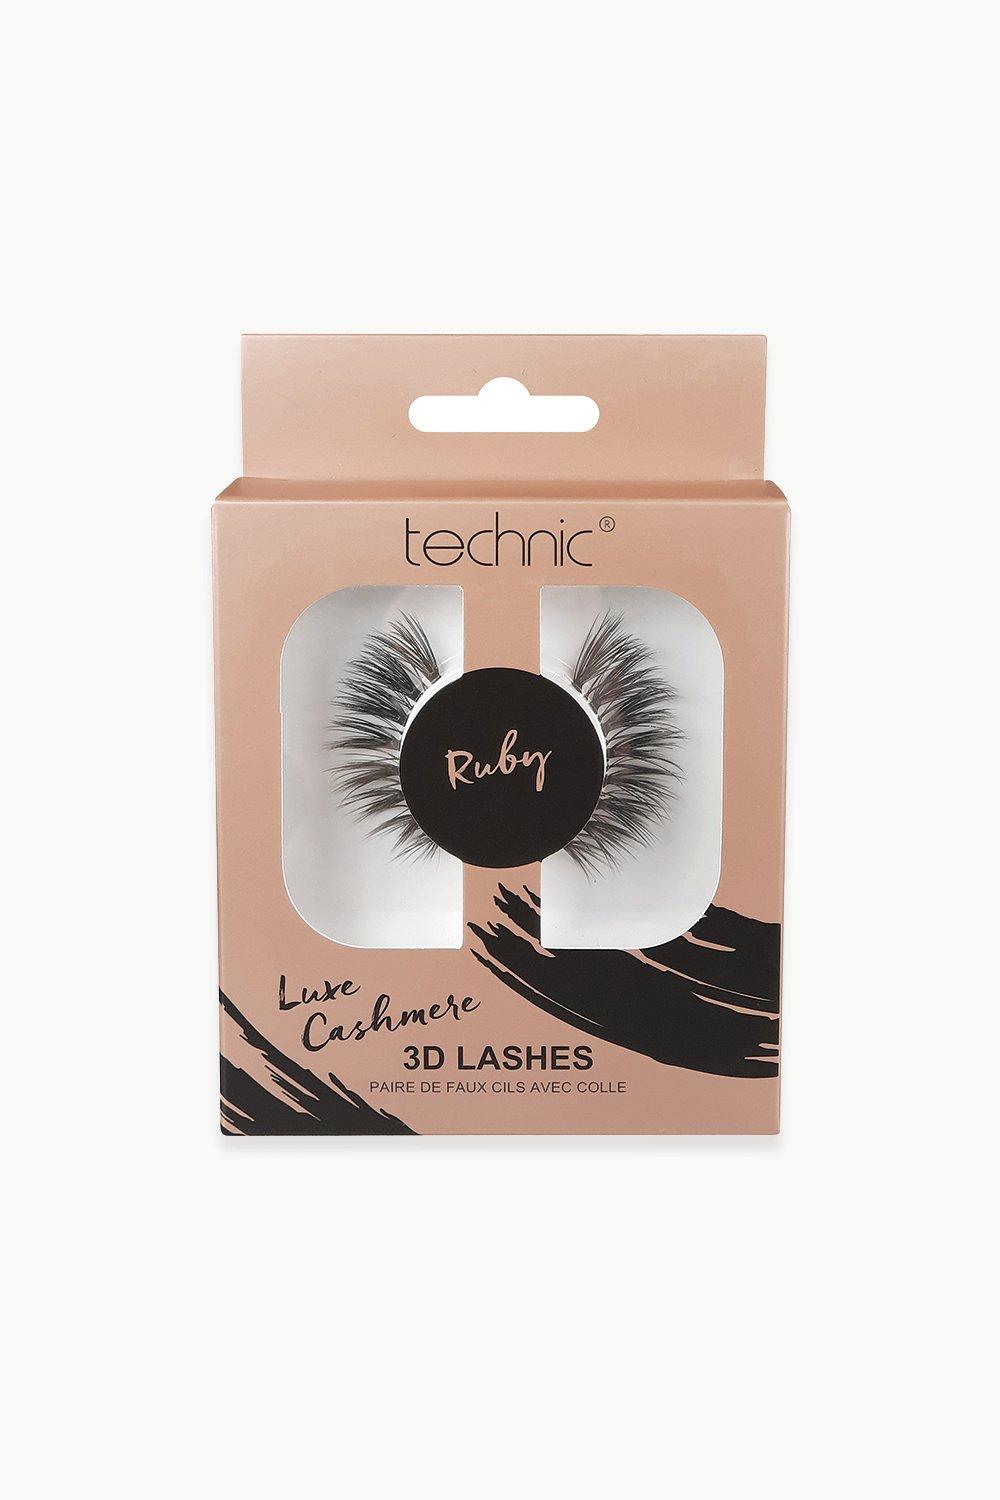 Technic Luxe Cashmere Lashes - Ruby, Black